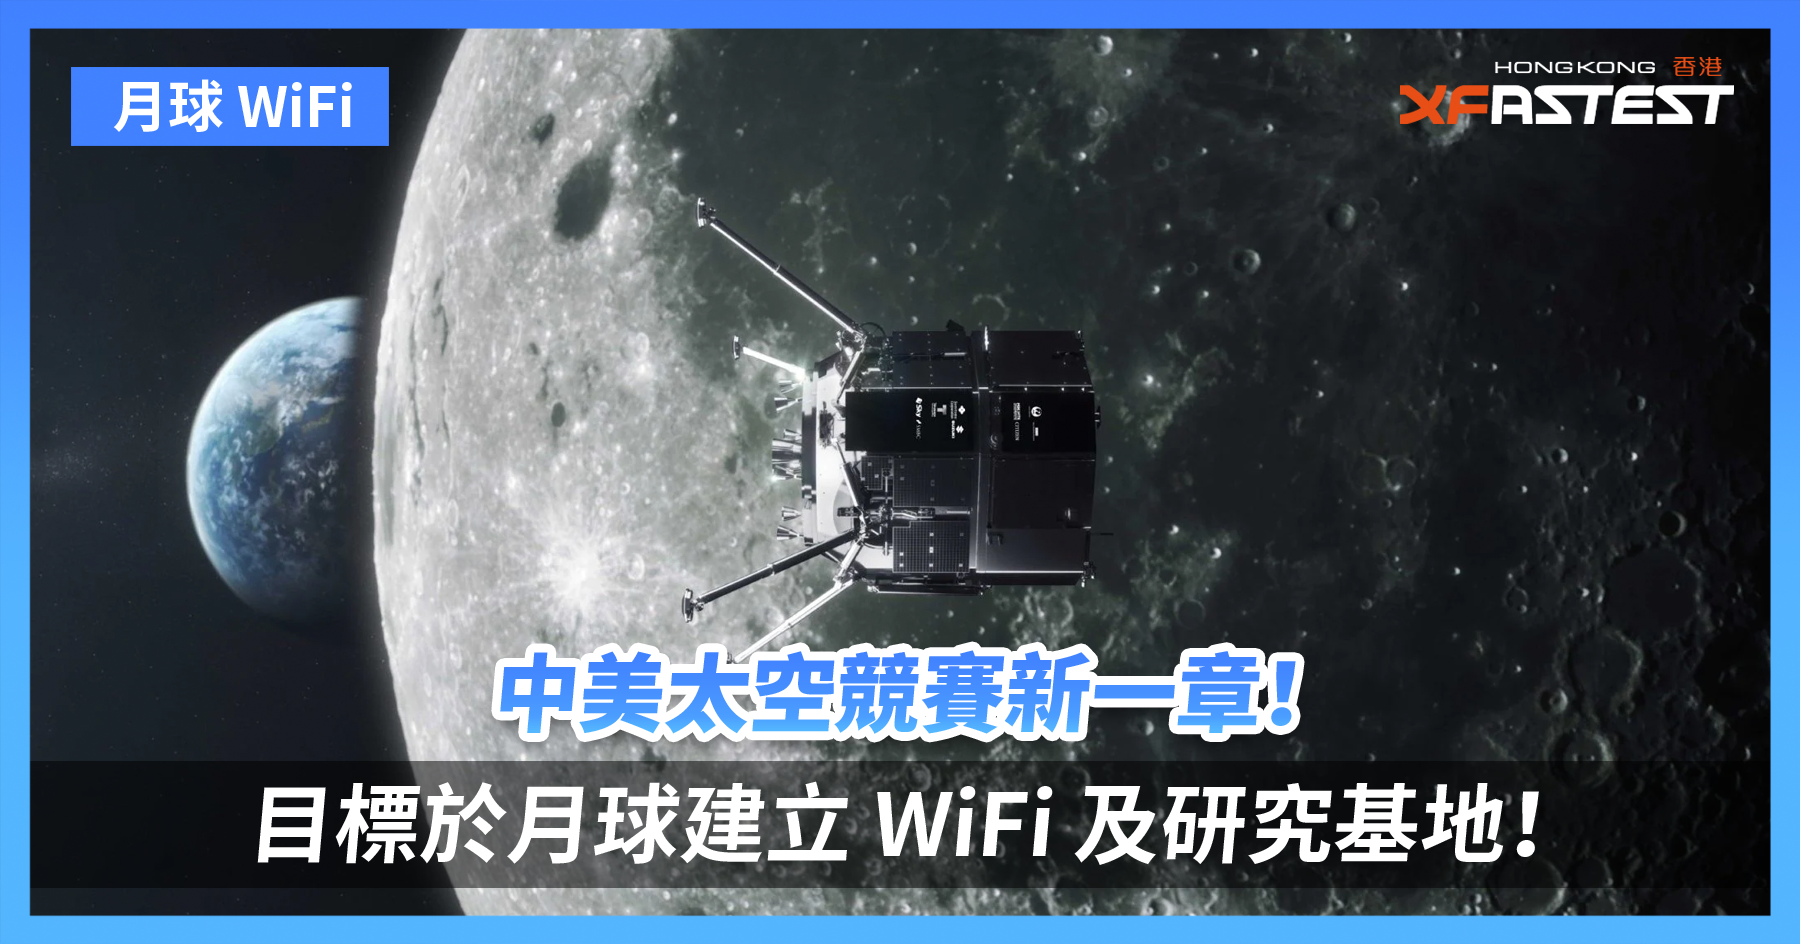 A new chapter in the US-China space race! The goal is to establish a ...